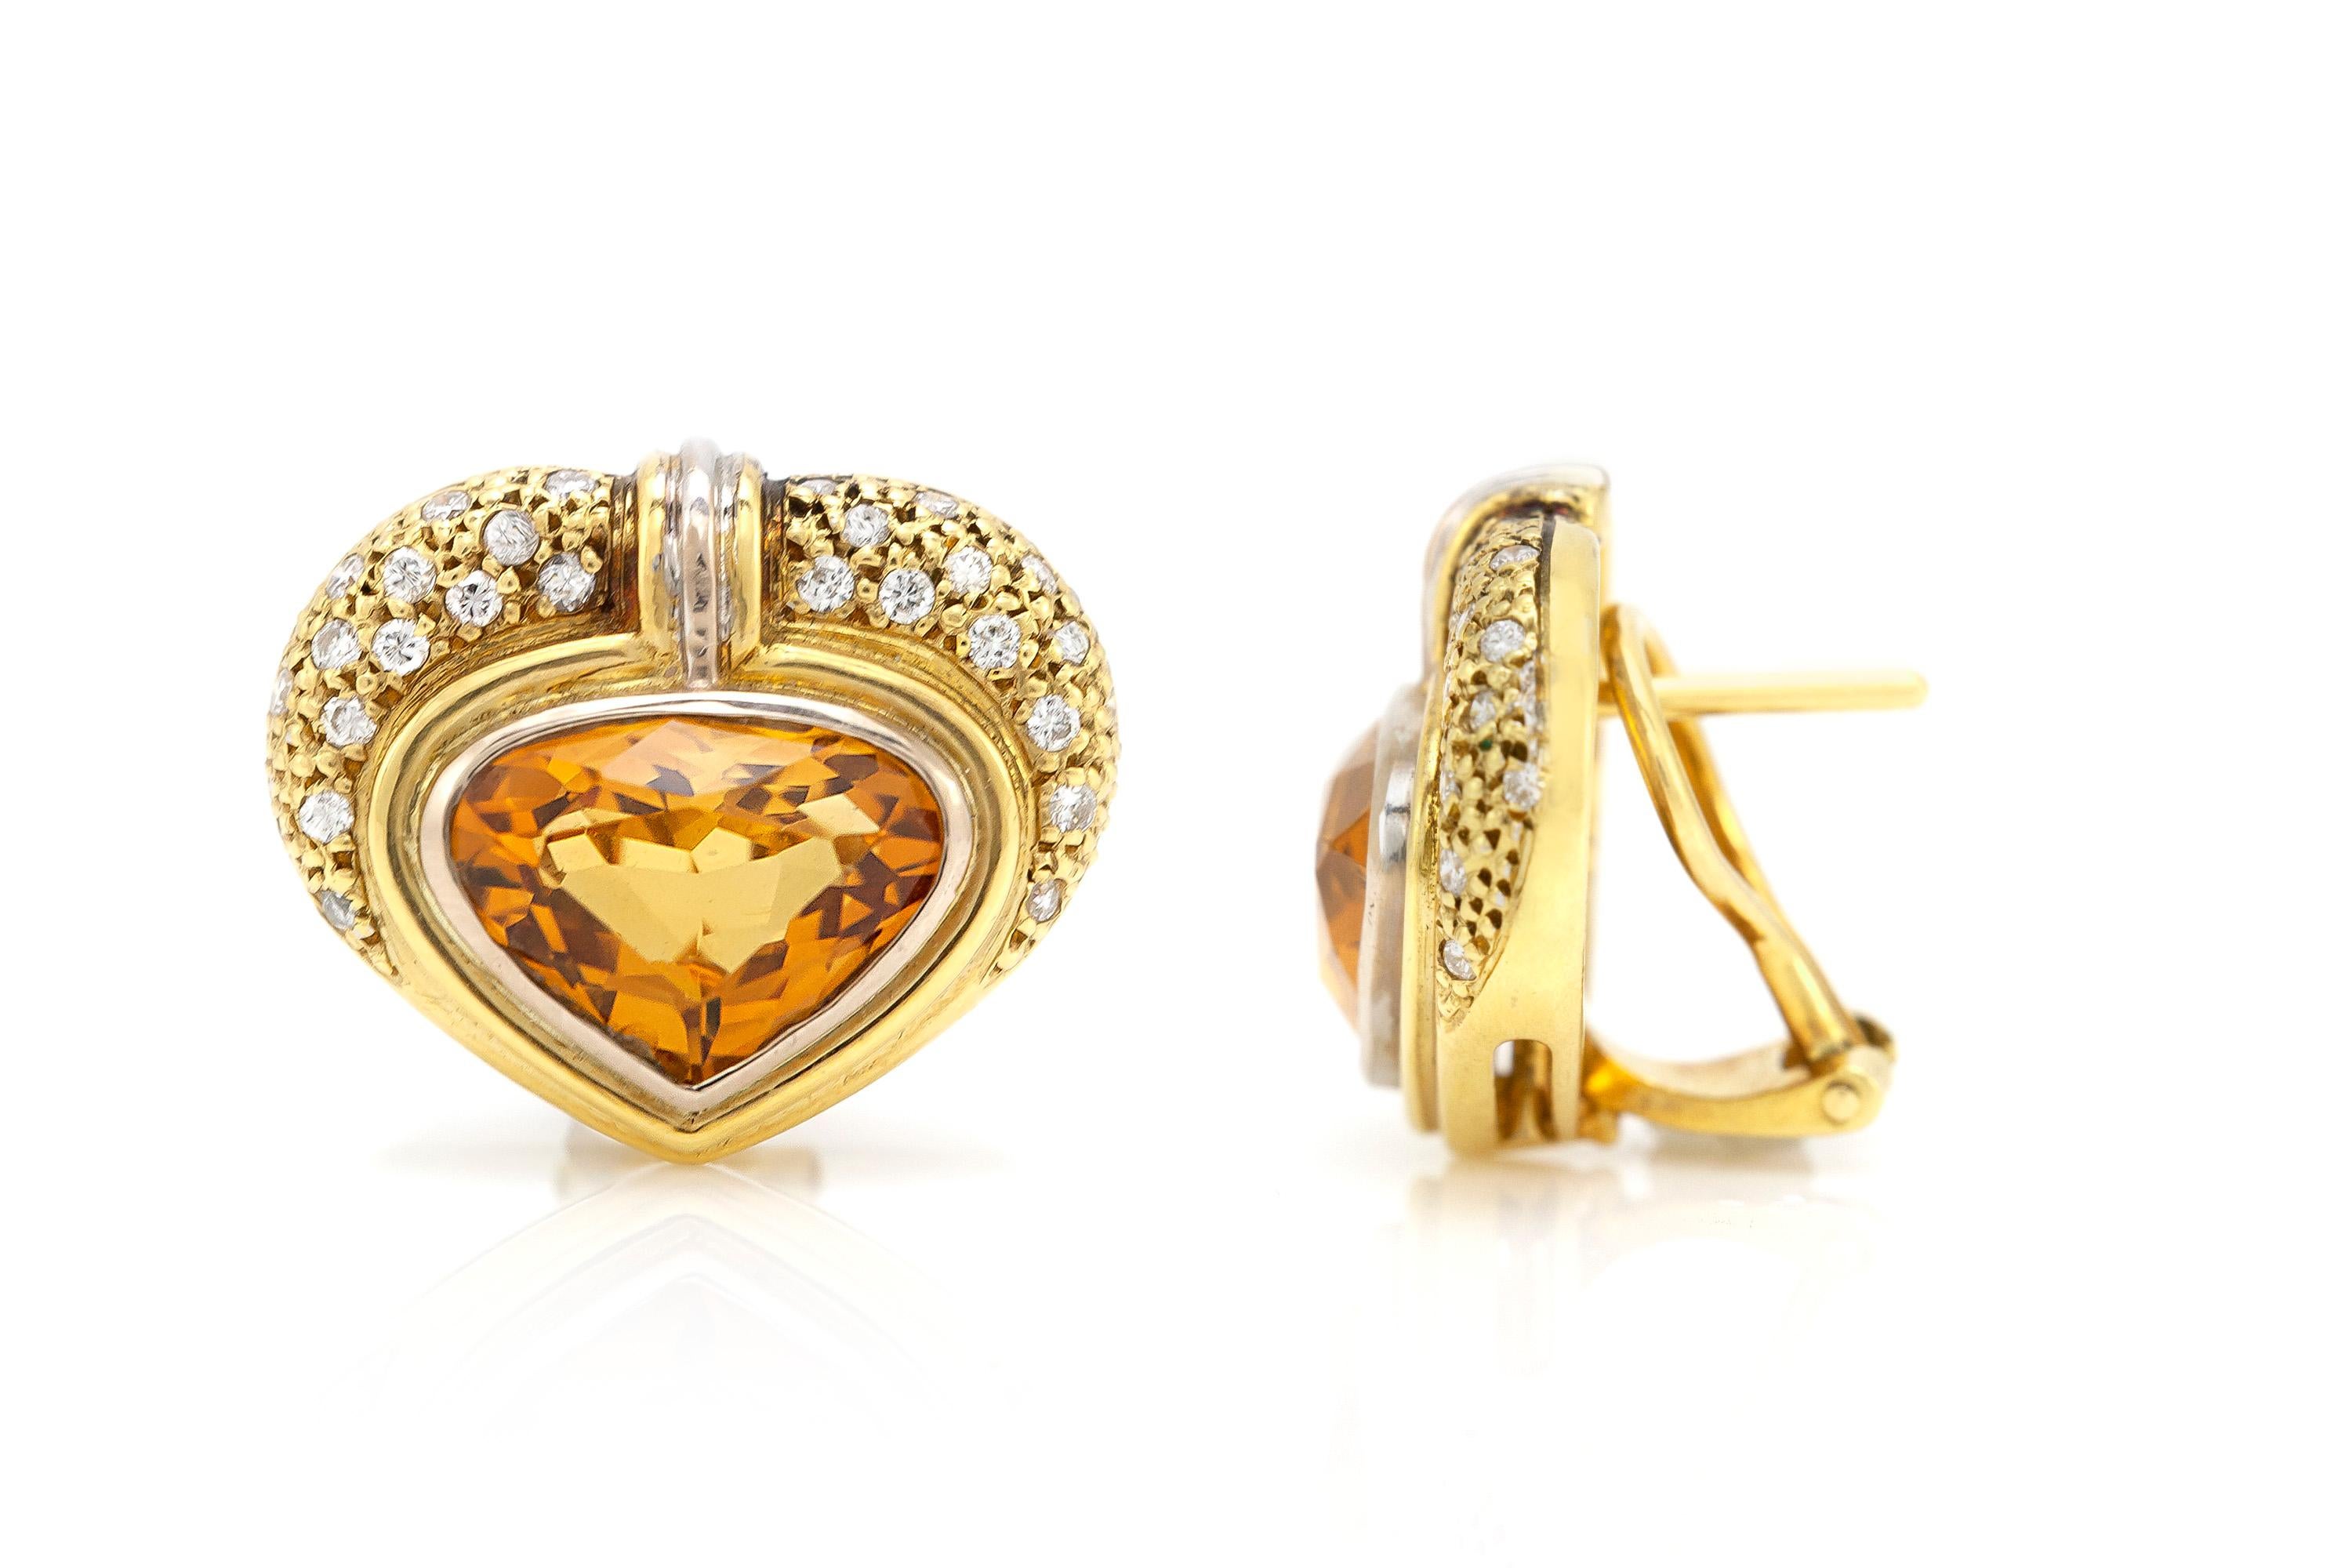 The earrings is finely crafted in 18k yellow gold with diamonds weighing approximately total of 0.60 carat and citrine as center stone.
